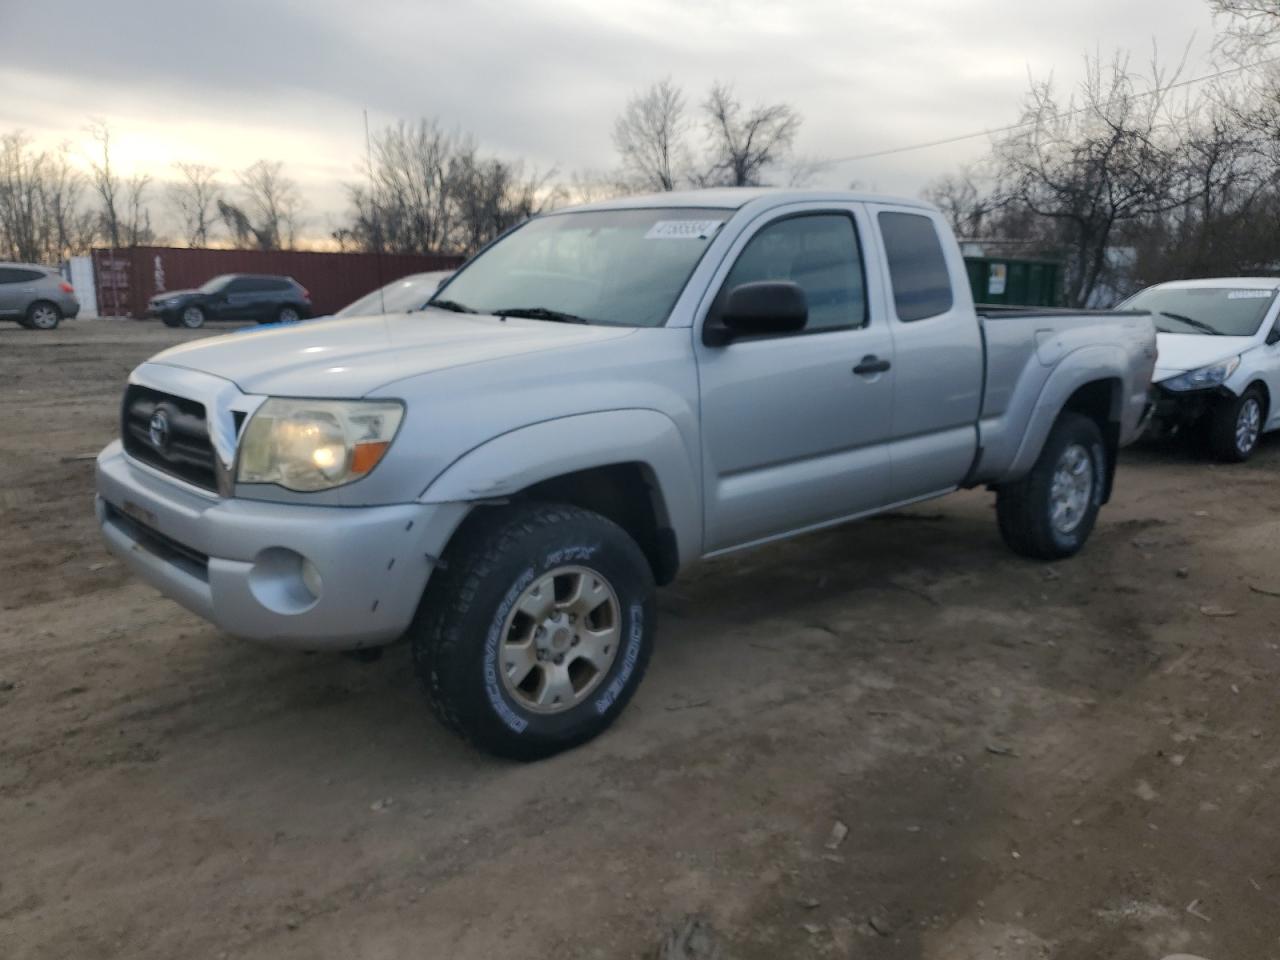 vin: 5TEUU42N87Z428558 5TEUU42N87Z428558 2007 toyota tacoma 4000 for Sale in 21225, Md - Baltimore East, Baltimore, USA